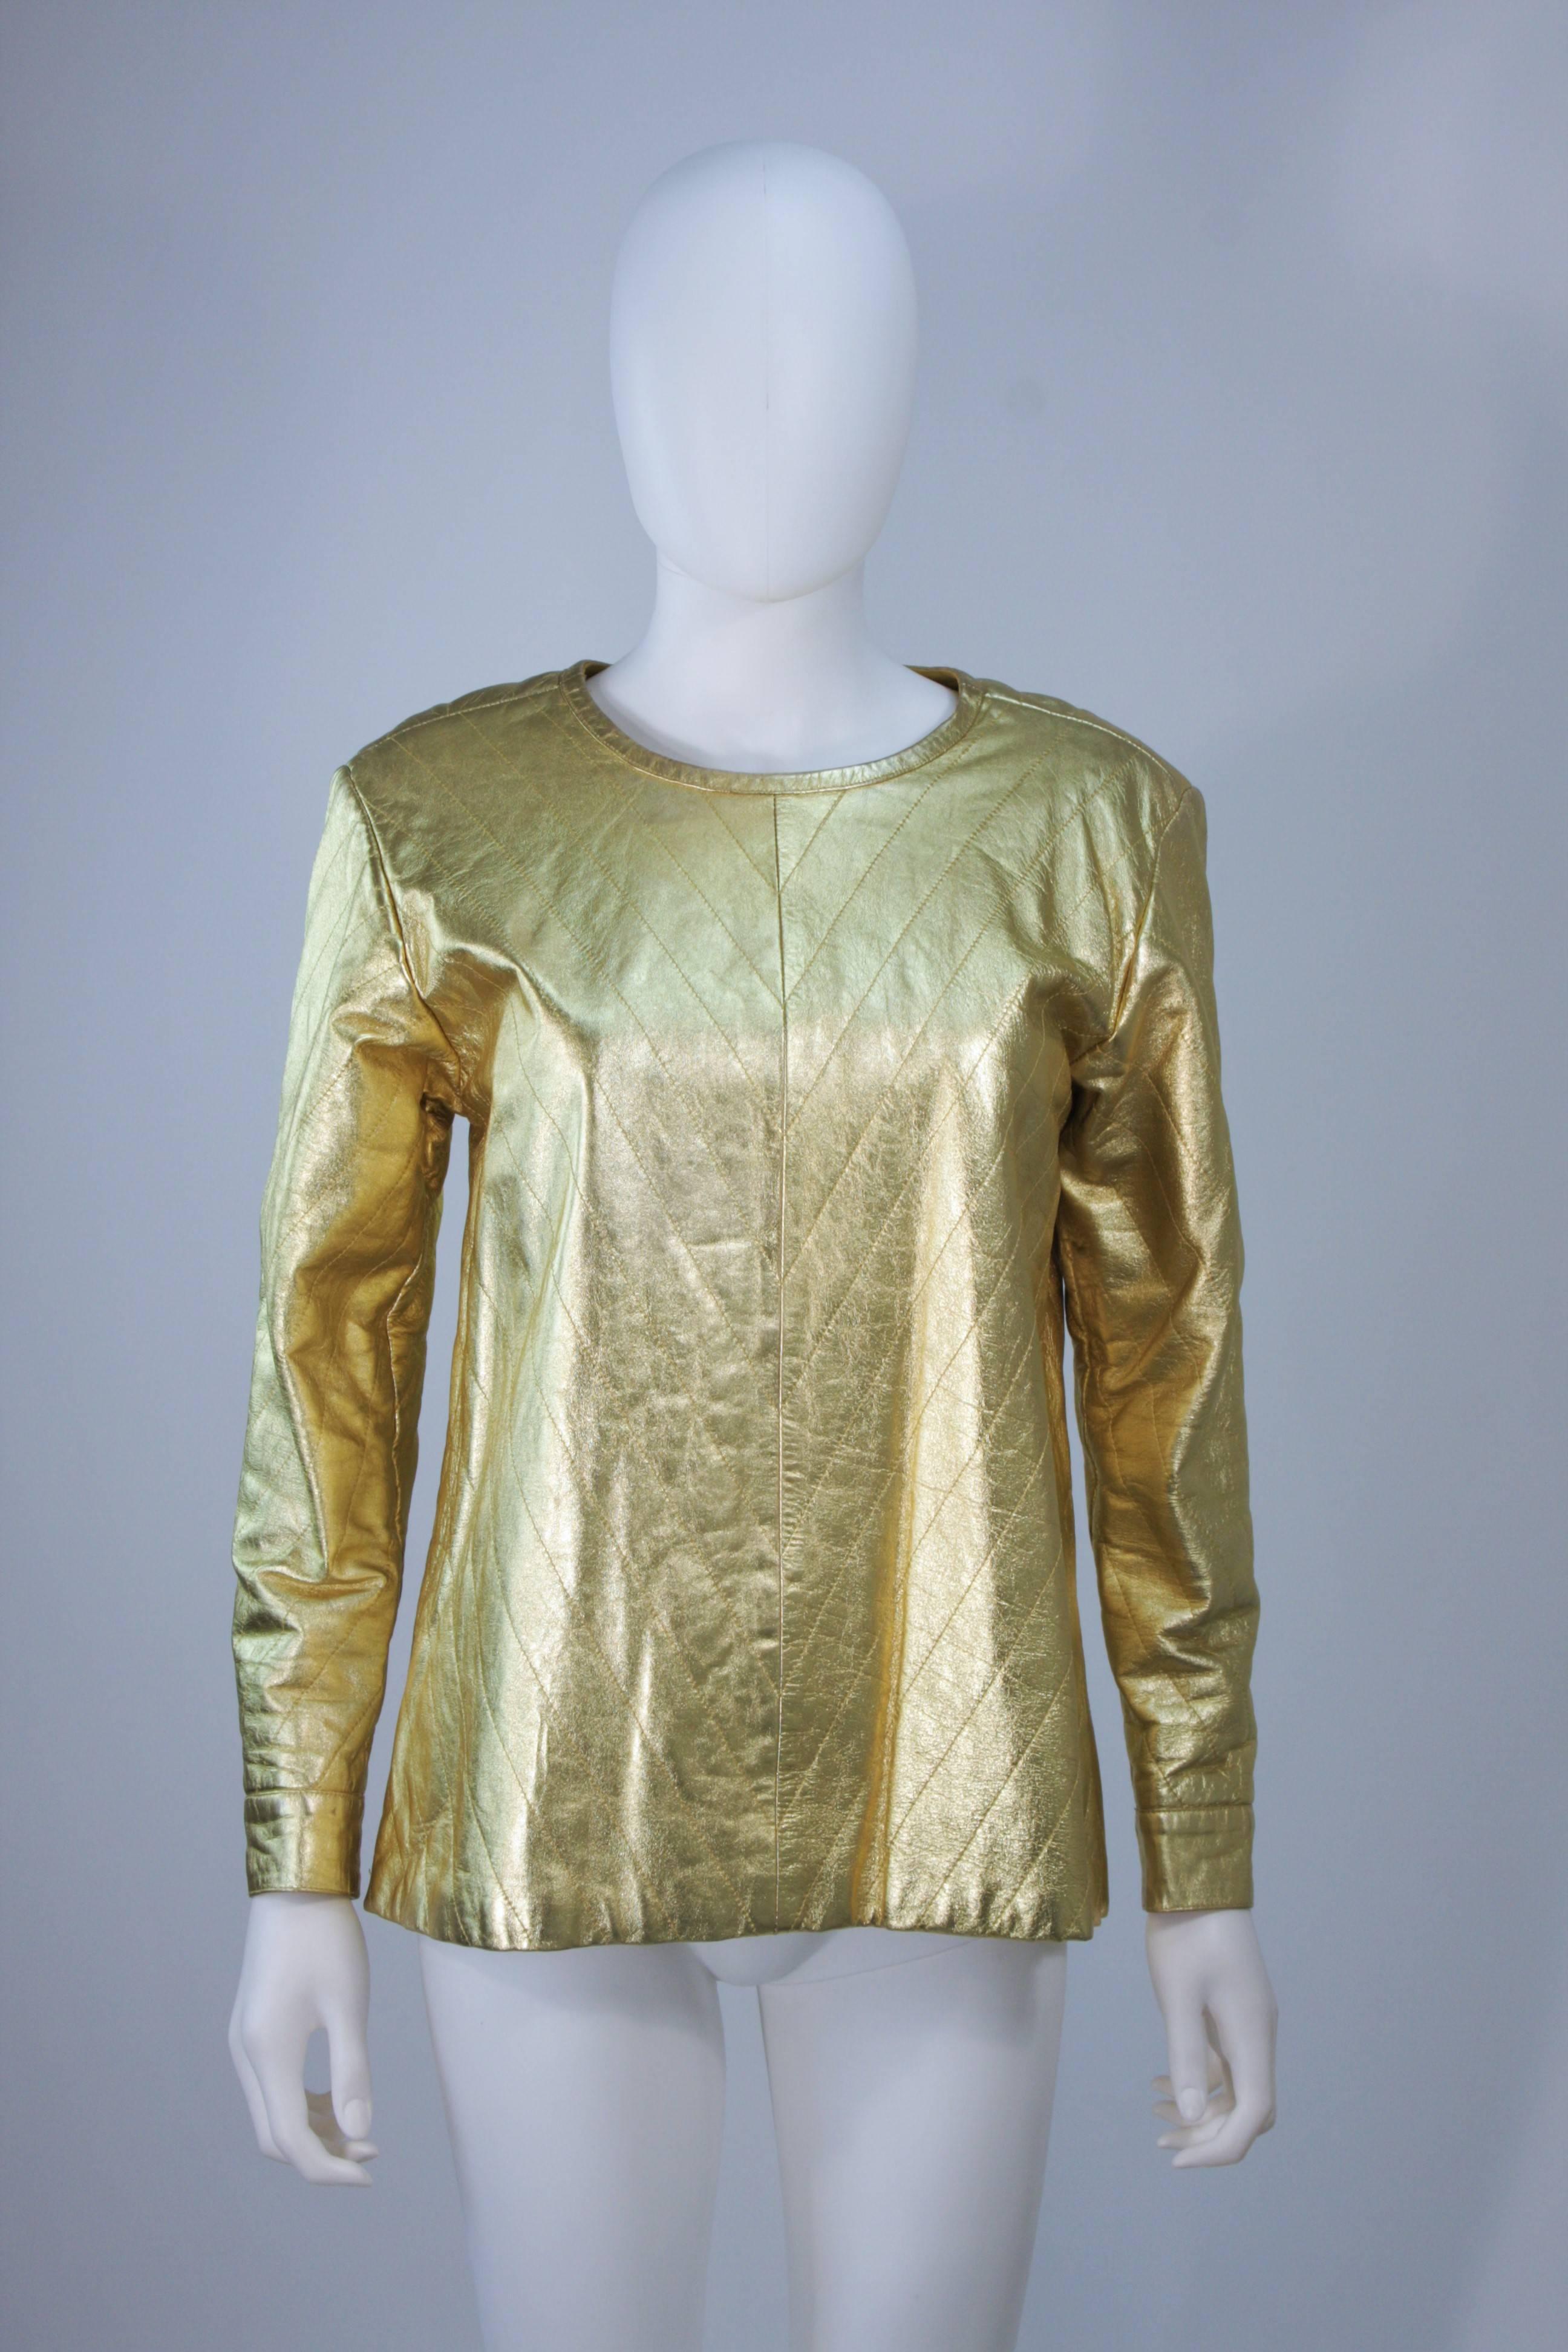  This Yves Saint Laurent top is composed of a gold metallic leather in a quilted pattern. The pull on style features a center back neck button. In excellent vintage condition.

This YSL gold leather top is from an extensive collection I acquired